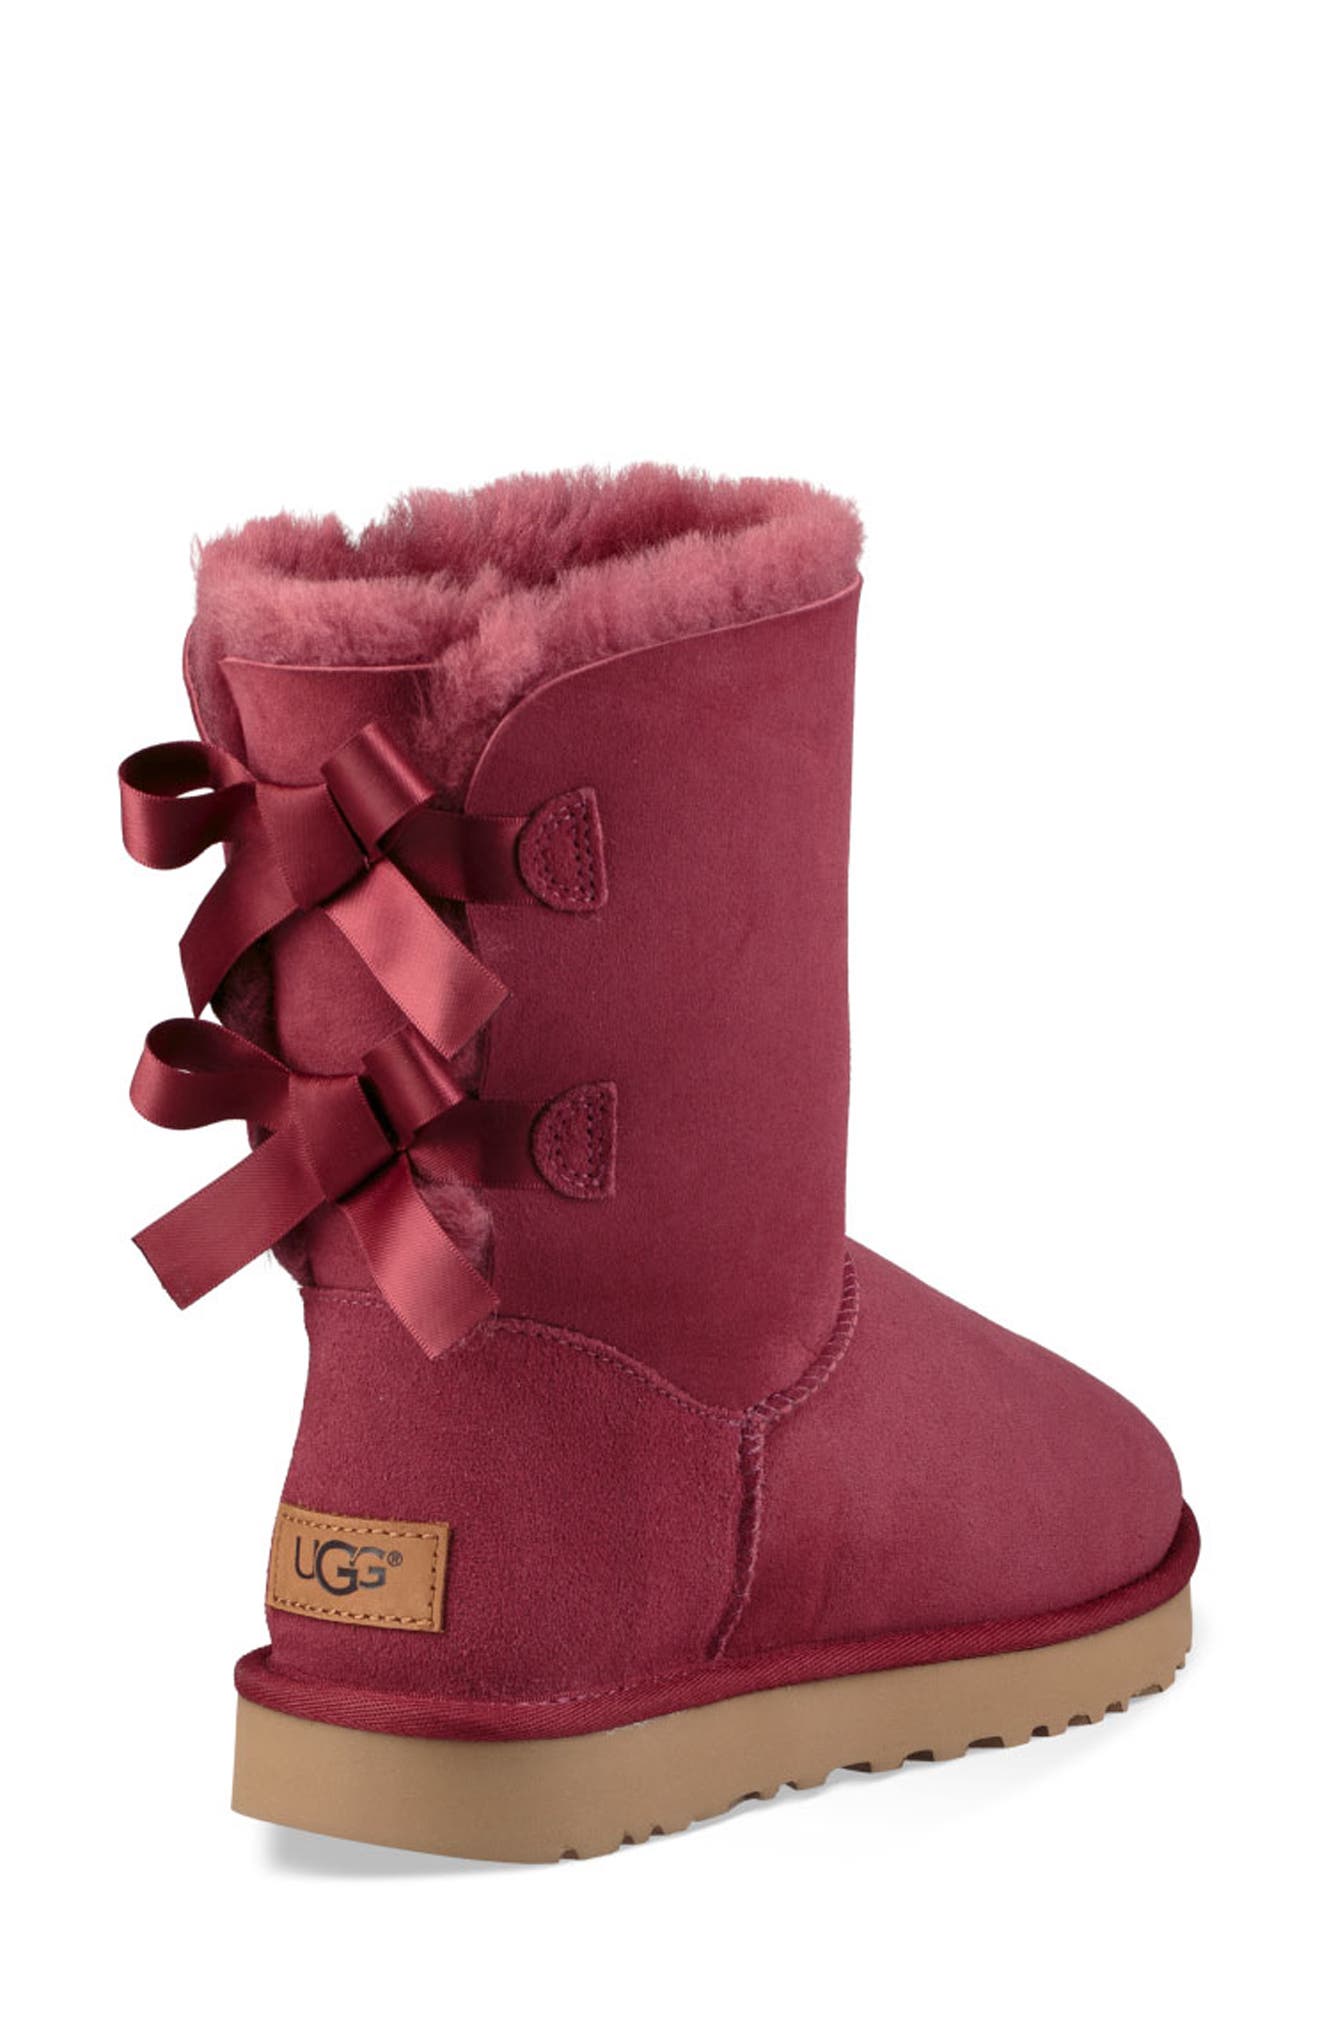 bailey bow uggs nordstrom rack